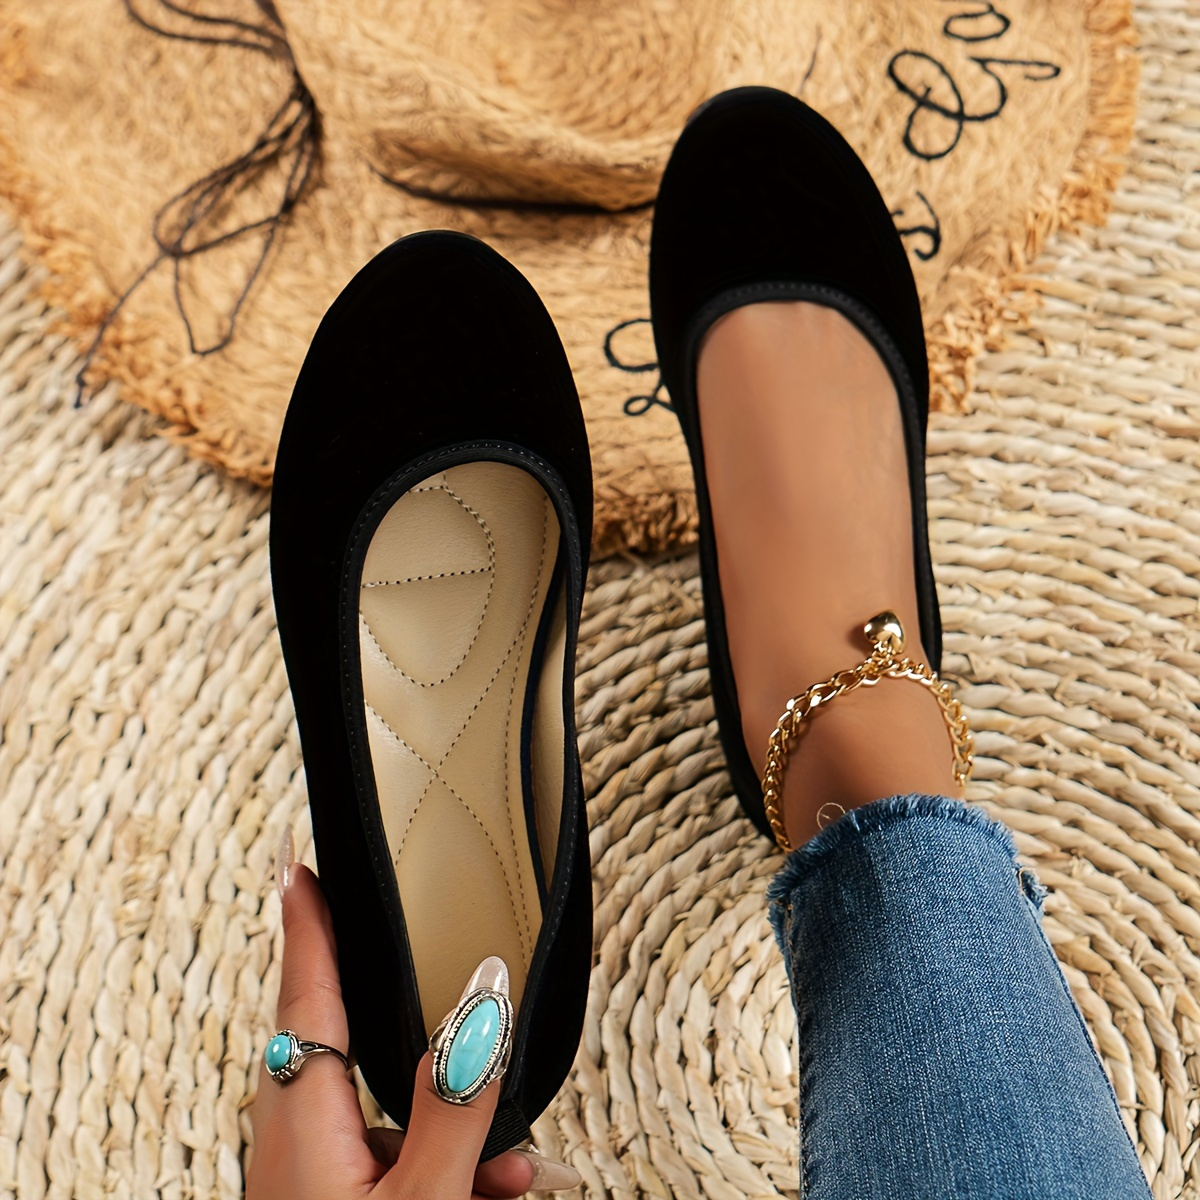 

Women's Round Toe Flat Shoes, Comfortable Black Slip On Shoes, All-match Soft Sole Work Flats